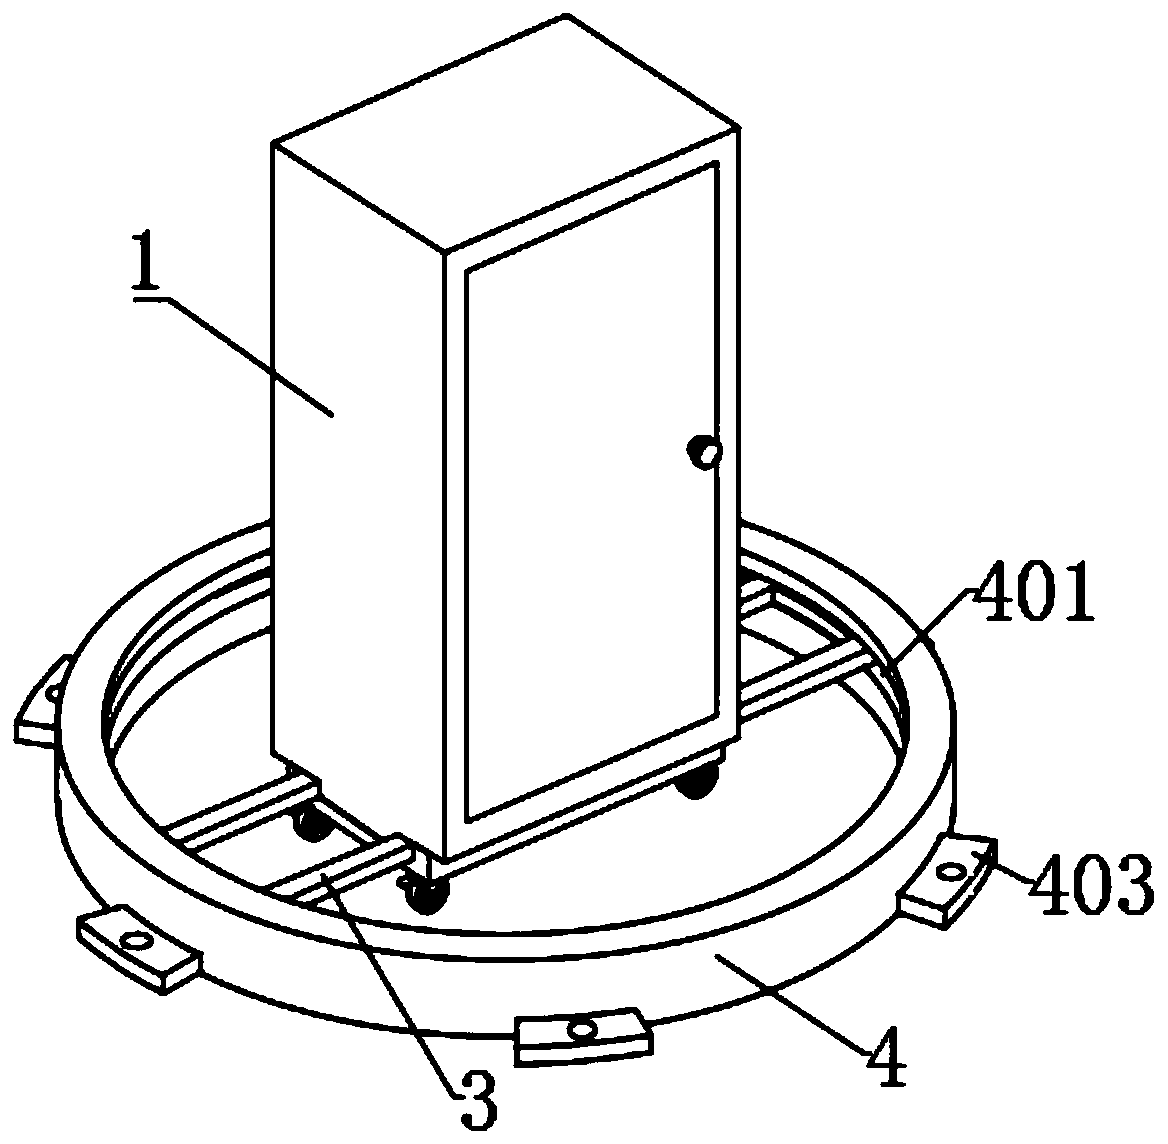 A slidable distribution box based on a bottom slide rail for electrical engineering